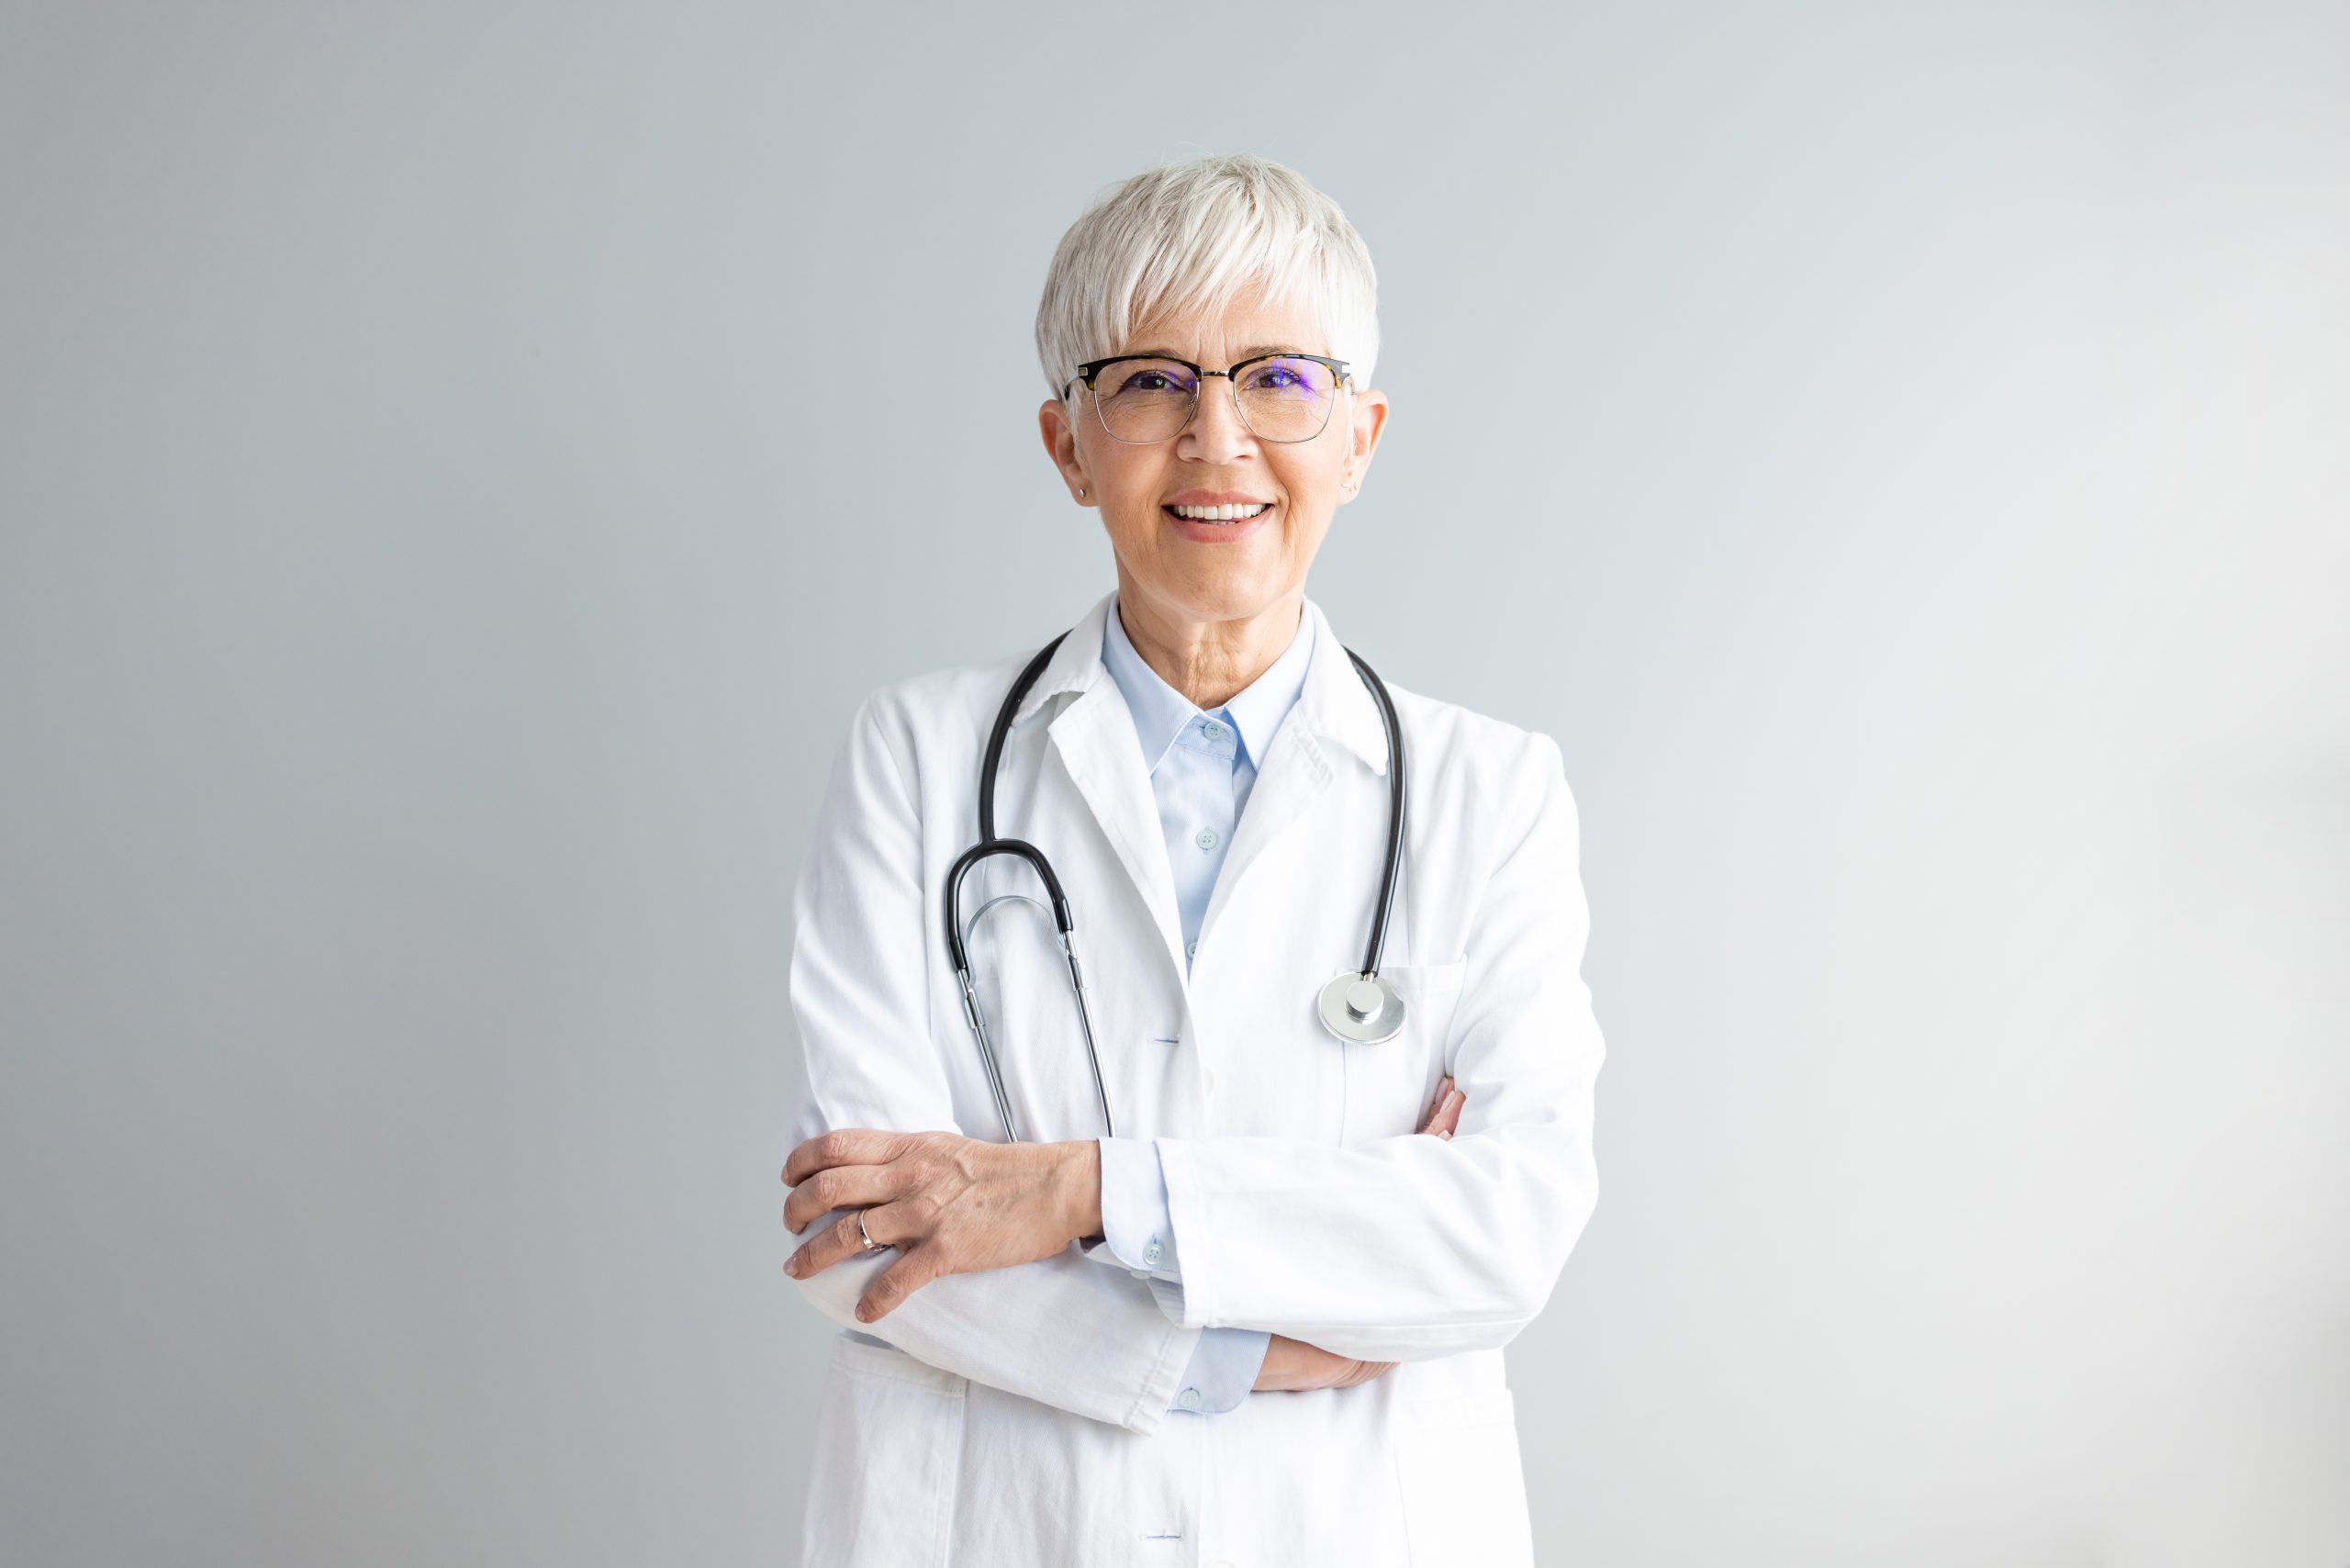 Portrait of confident smiling female doctor. Mature medical professional is wearing lab coat and stethoscope.